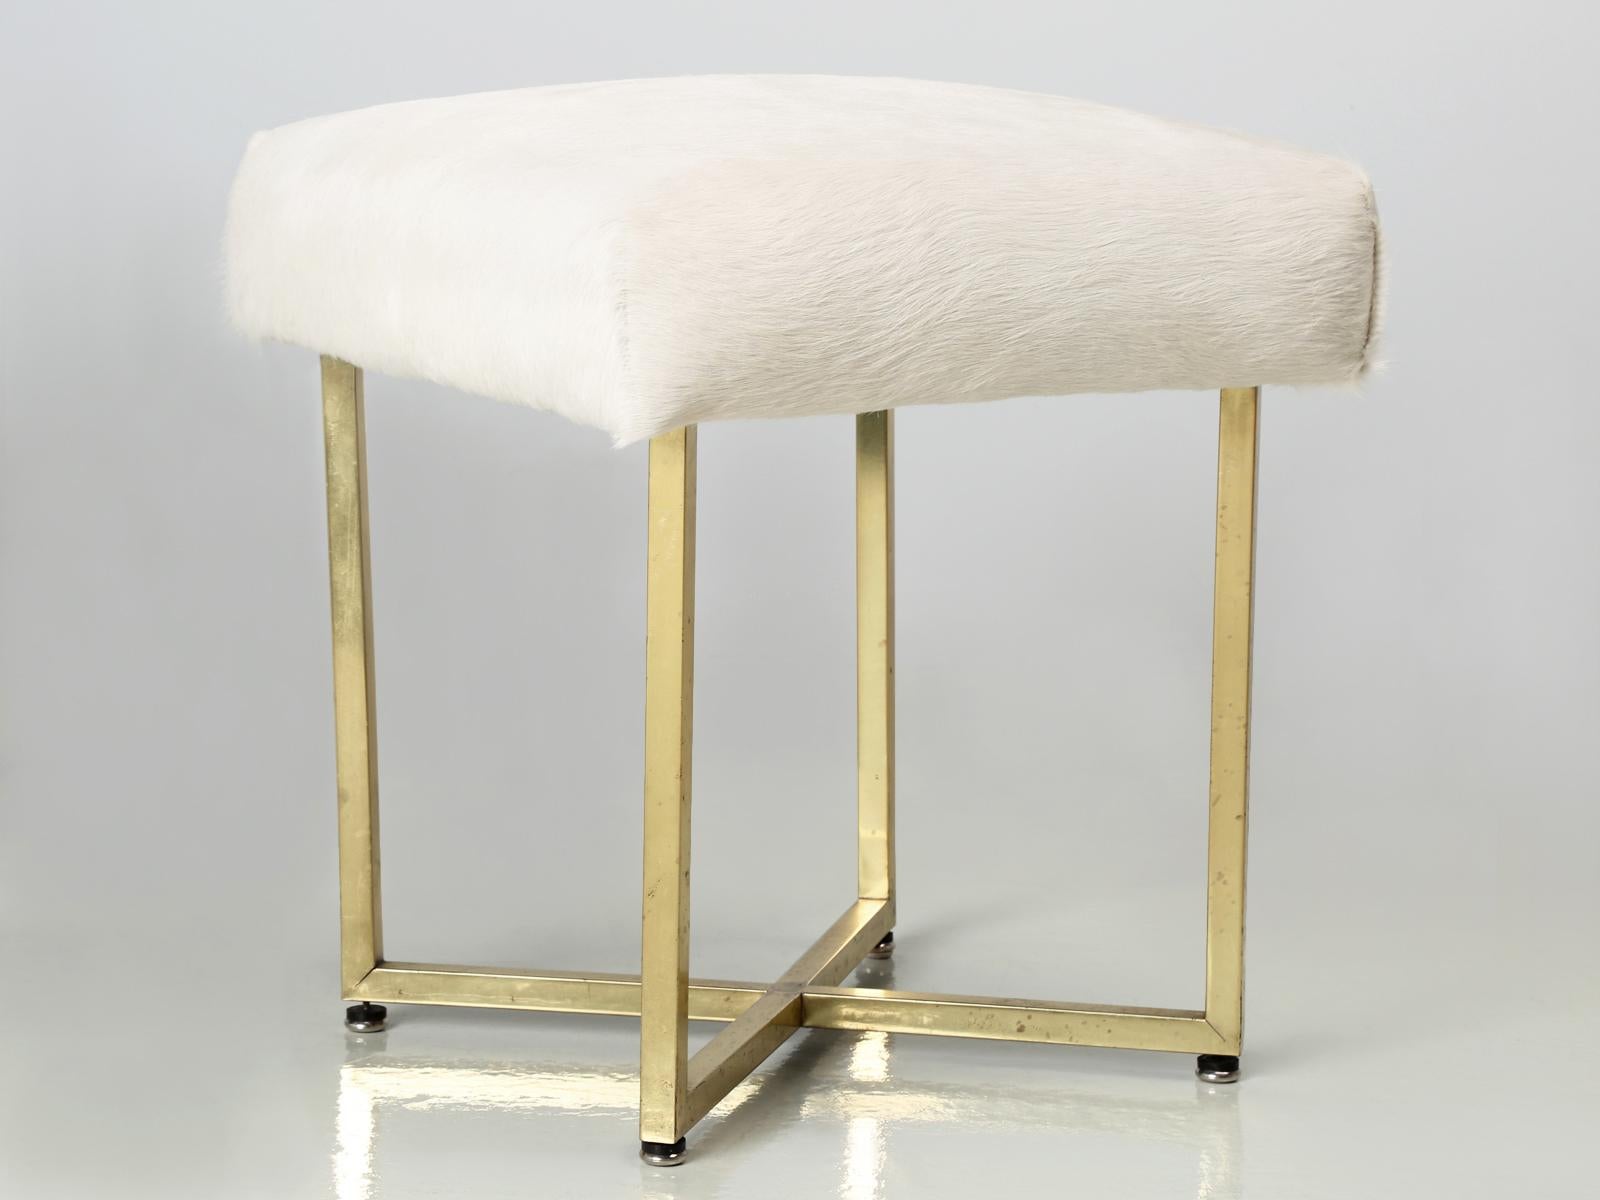 Pair of Vintage Brass Stools Attributed to Paul McCobb with Hair on Hide In Good Condition For Sale In Chicago, IL